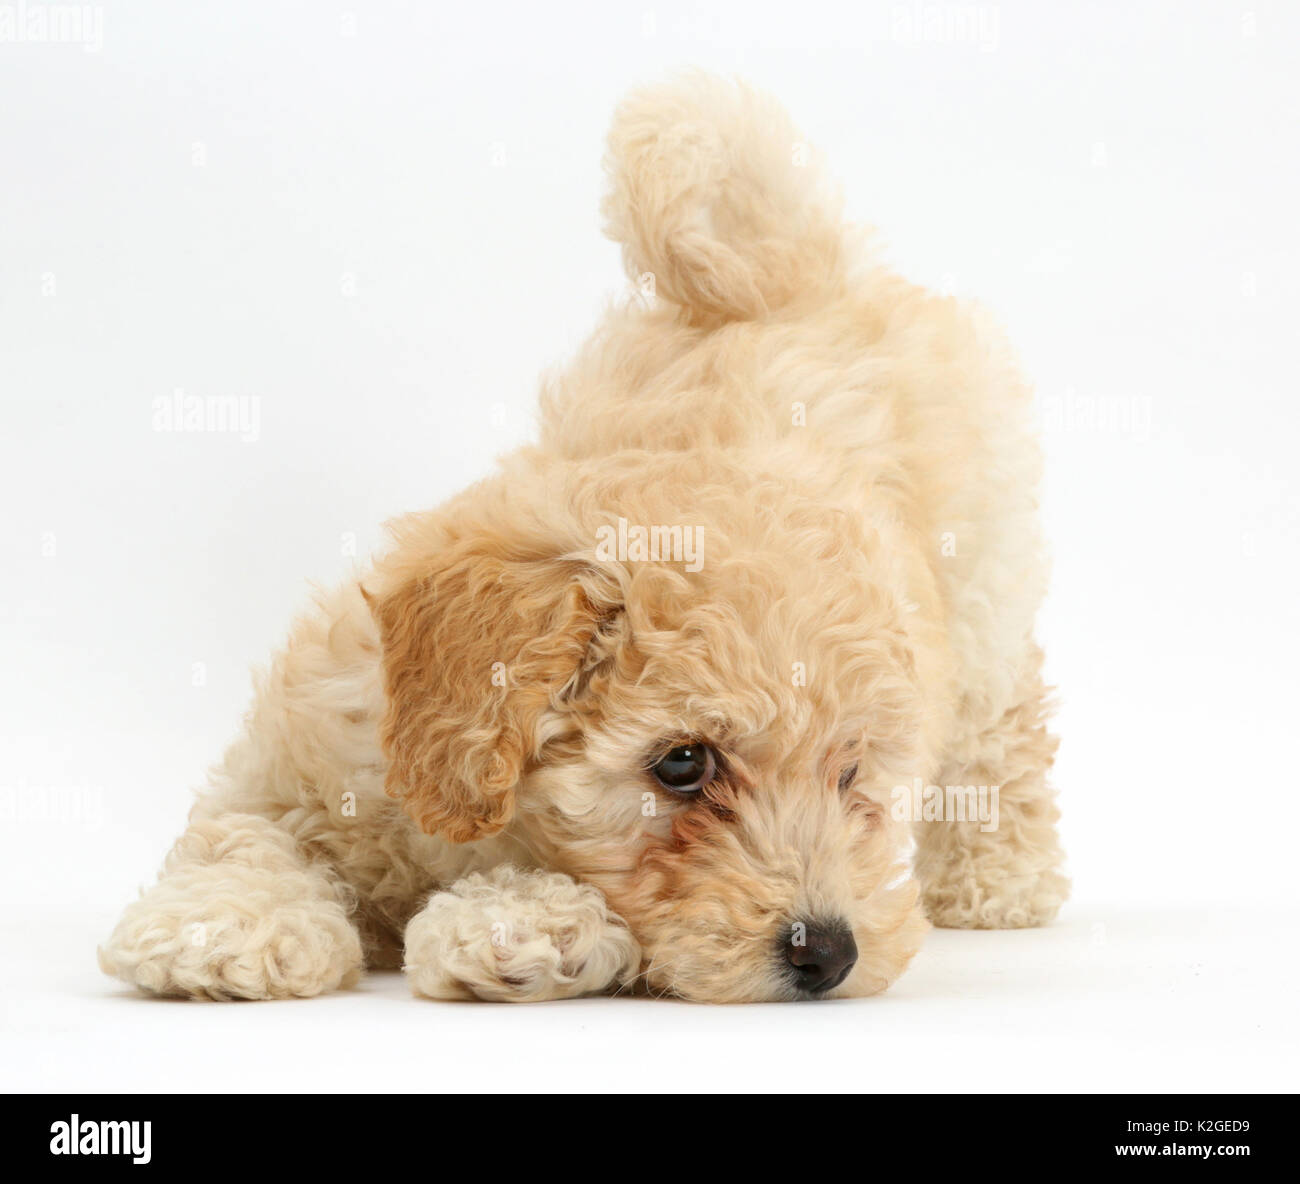 Poochon puppy, Bichon Frise cross Poodle, age 6 weeks in play bow. Stock Photo